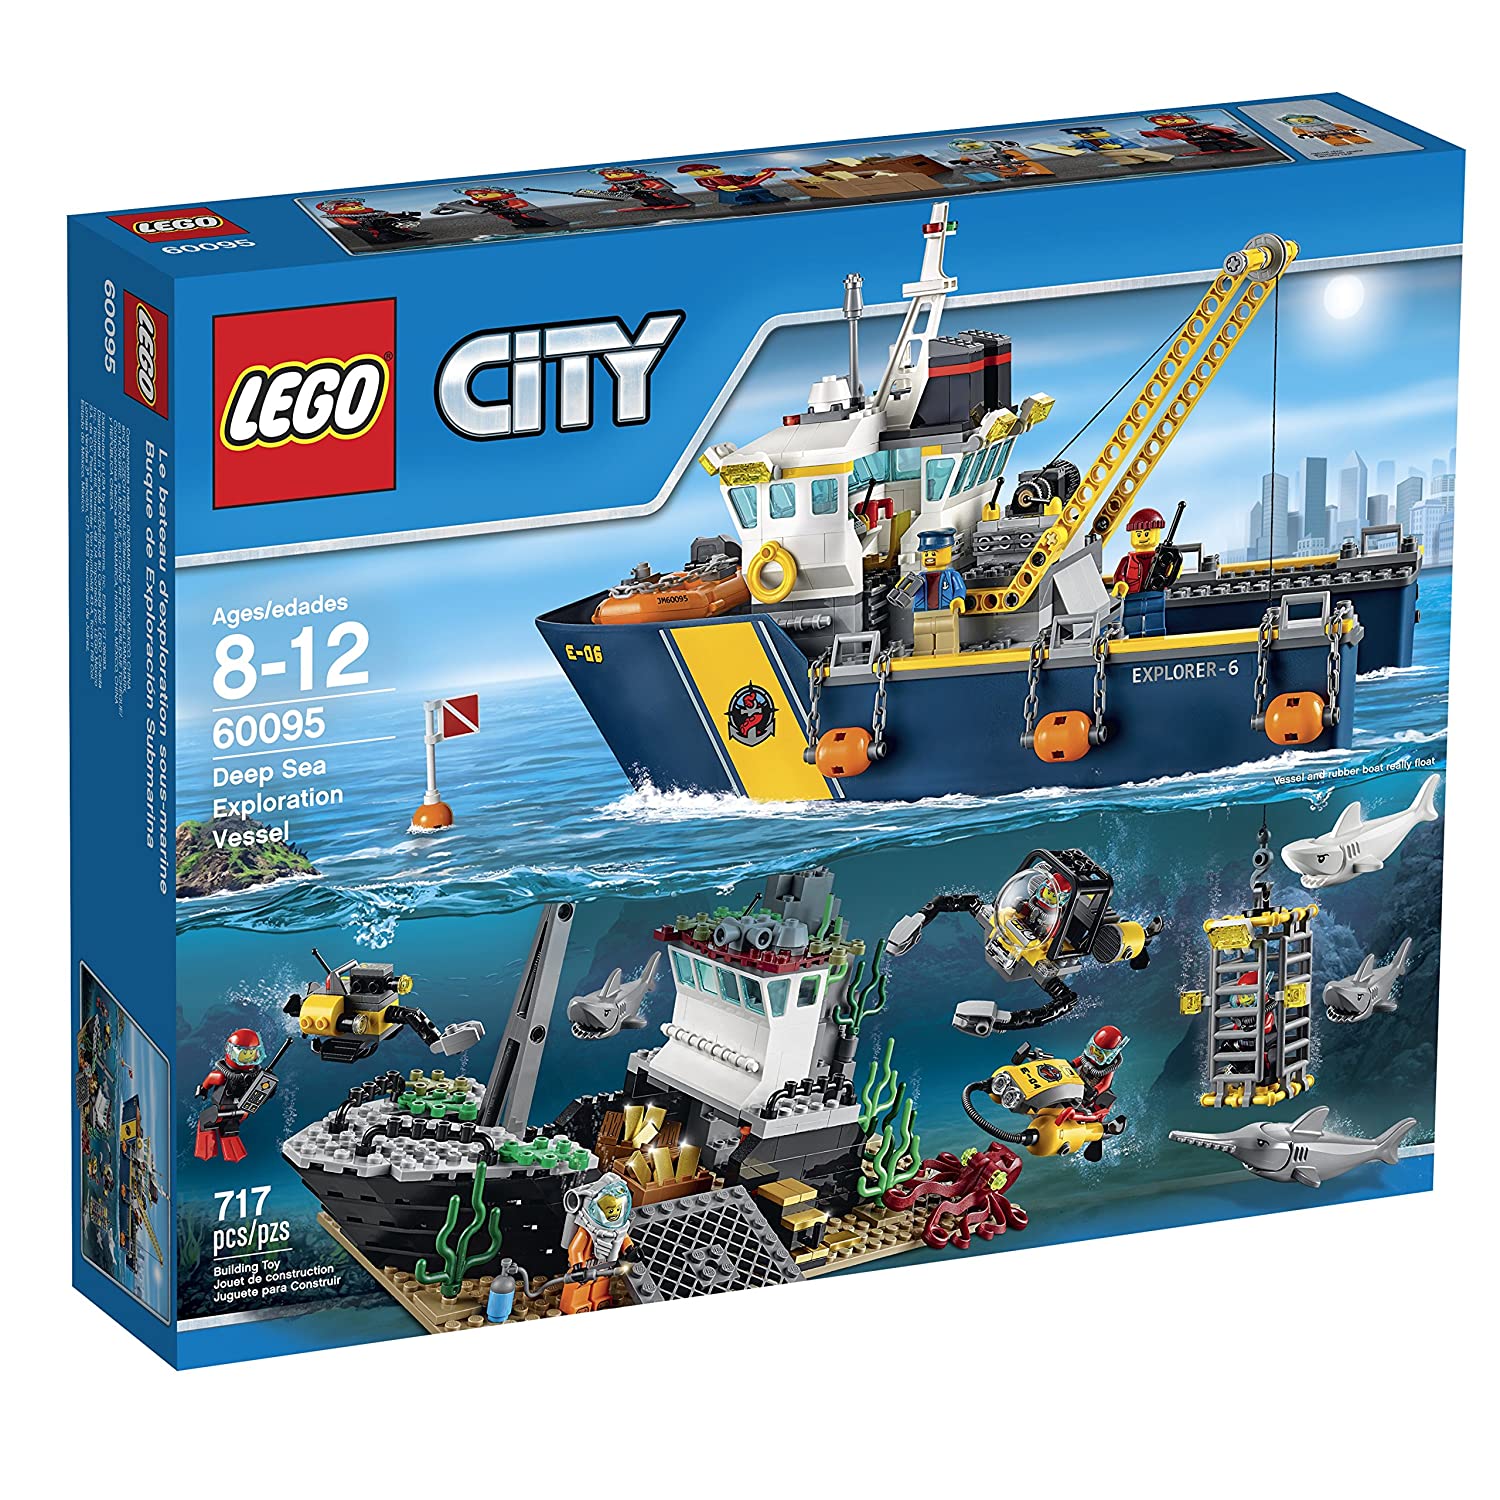 Top 9 Best LEGO Boat Sets Reviews in 2022 7